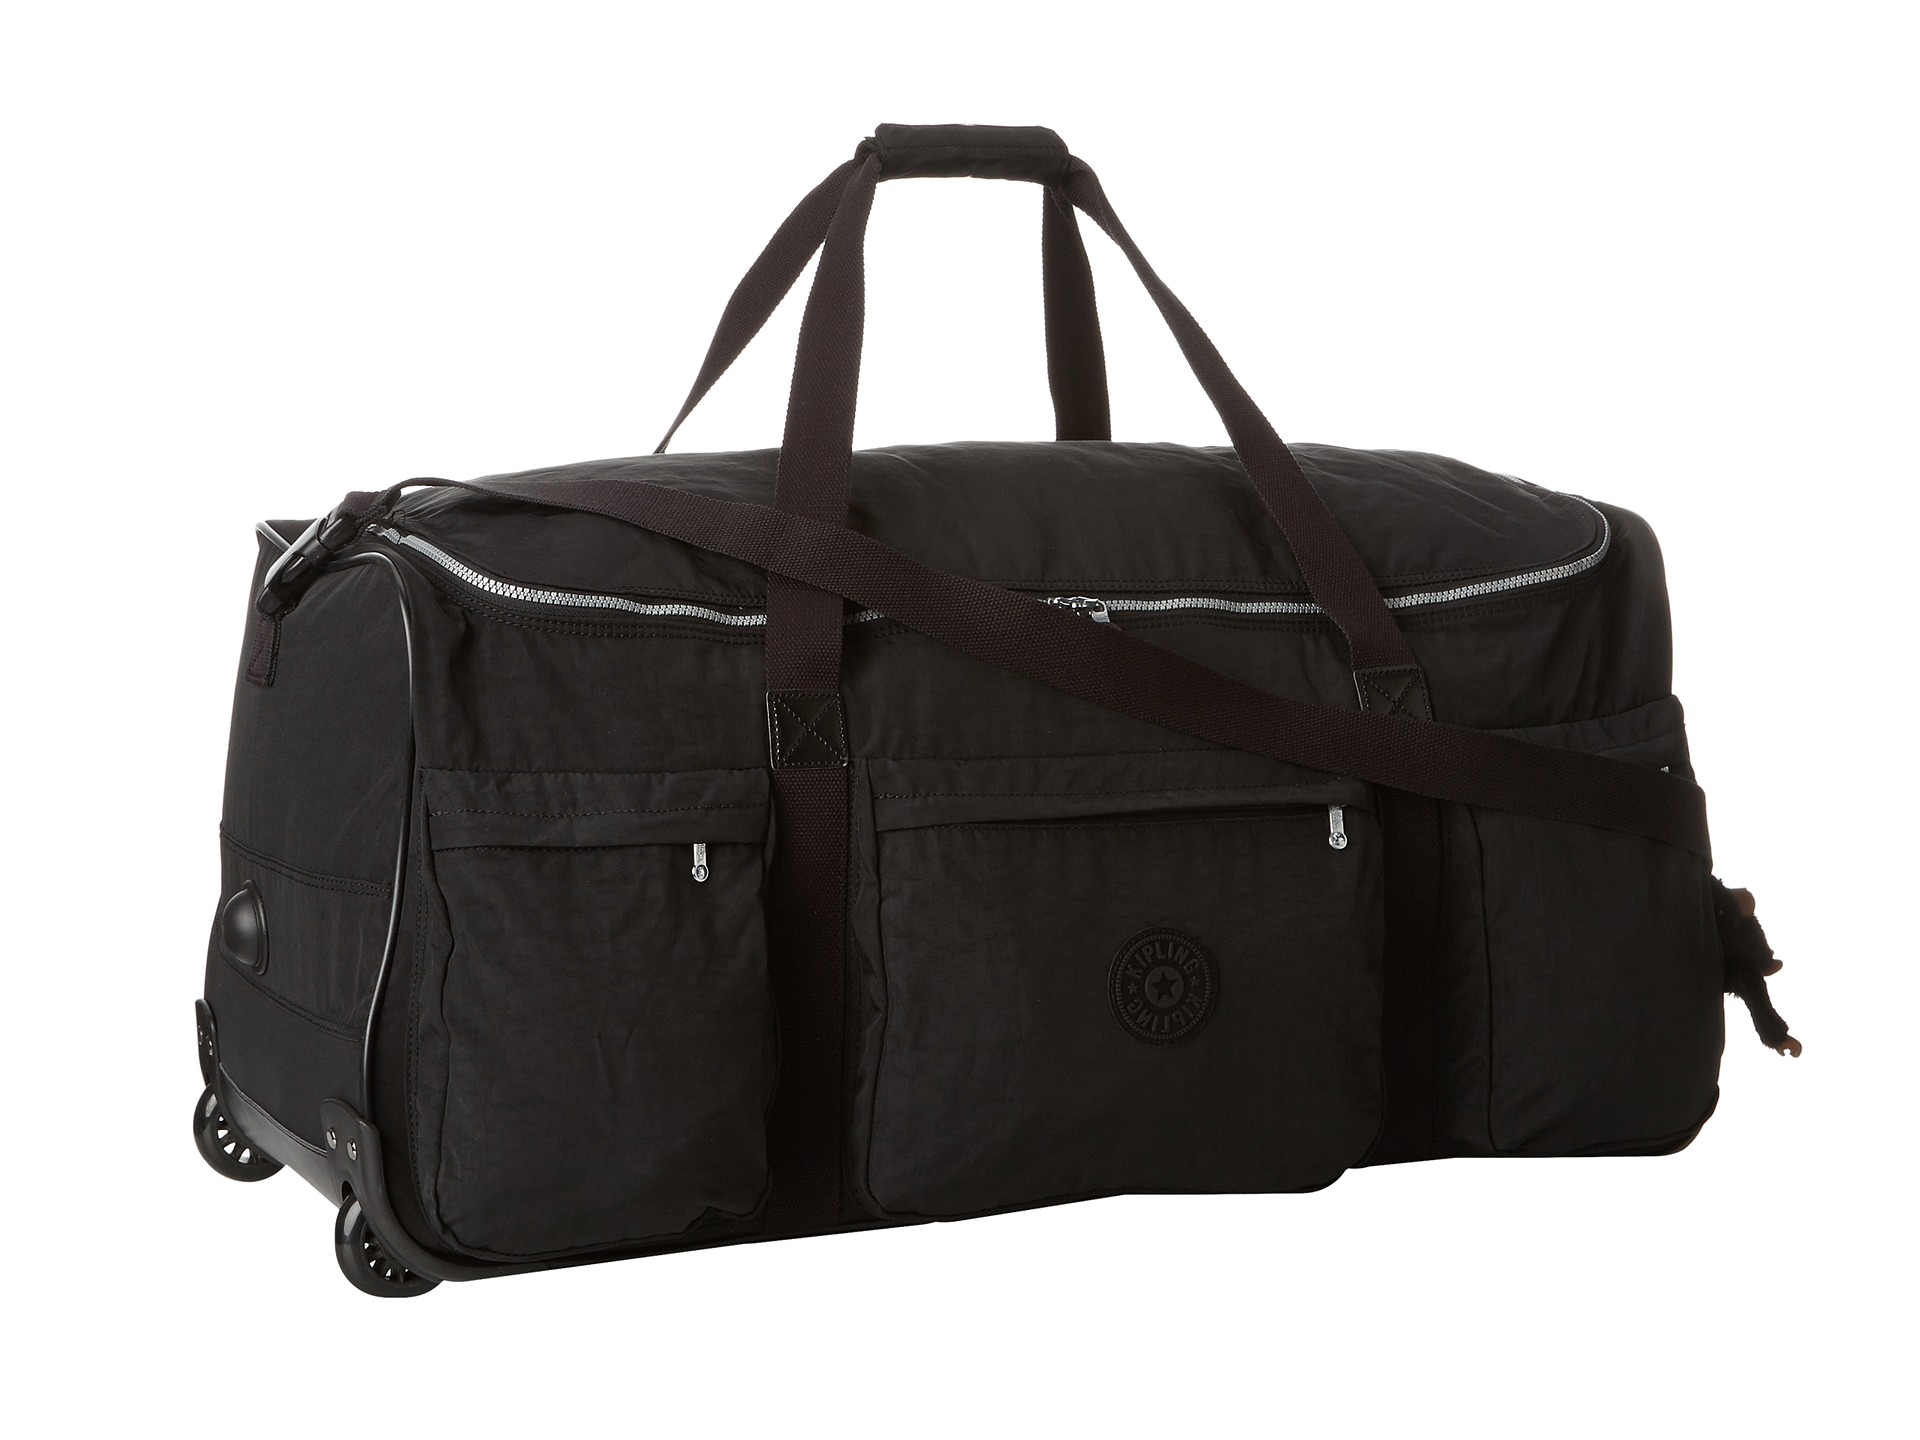 Kipling Discover Large Wheeled Luggage Duffle at www.bagssaleusa.com